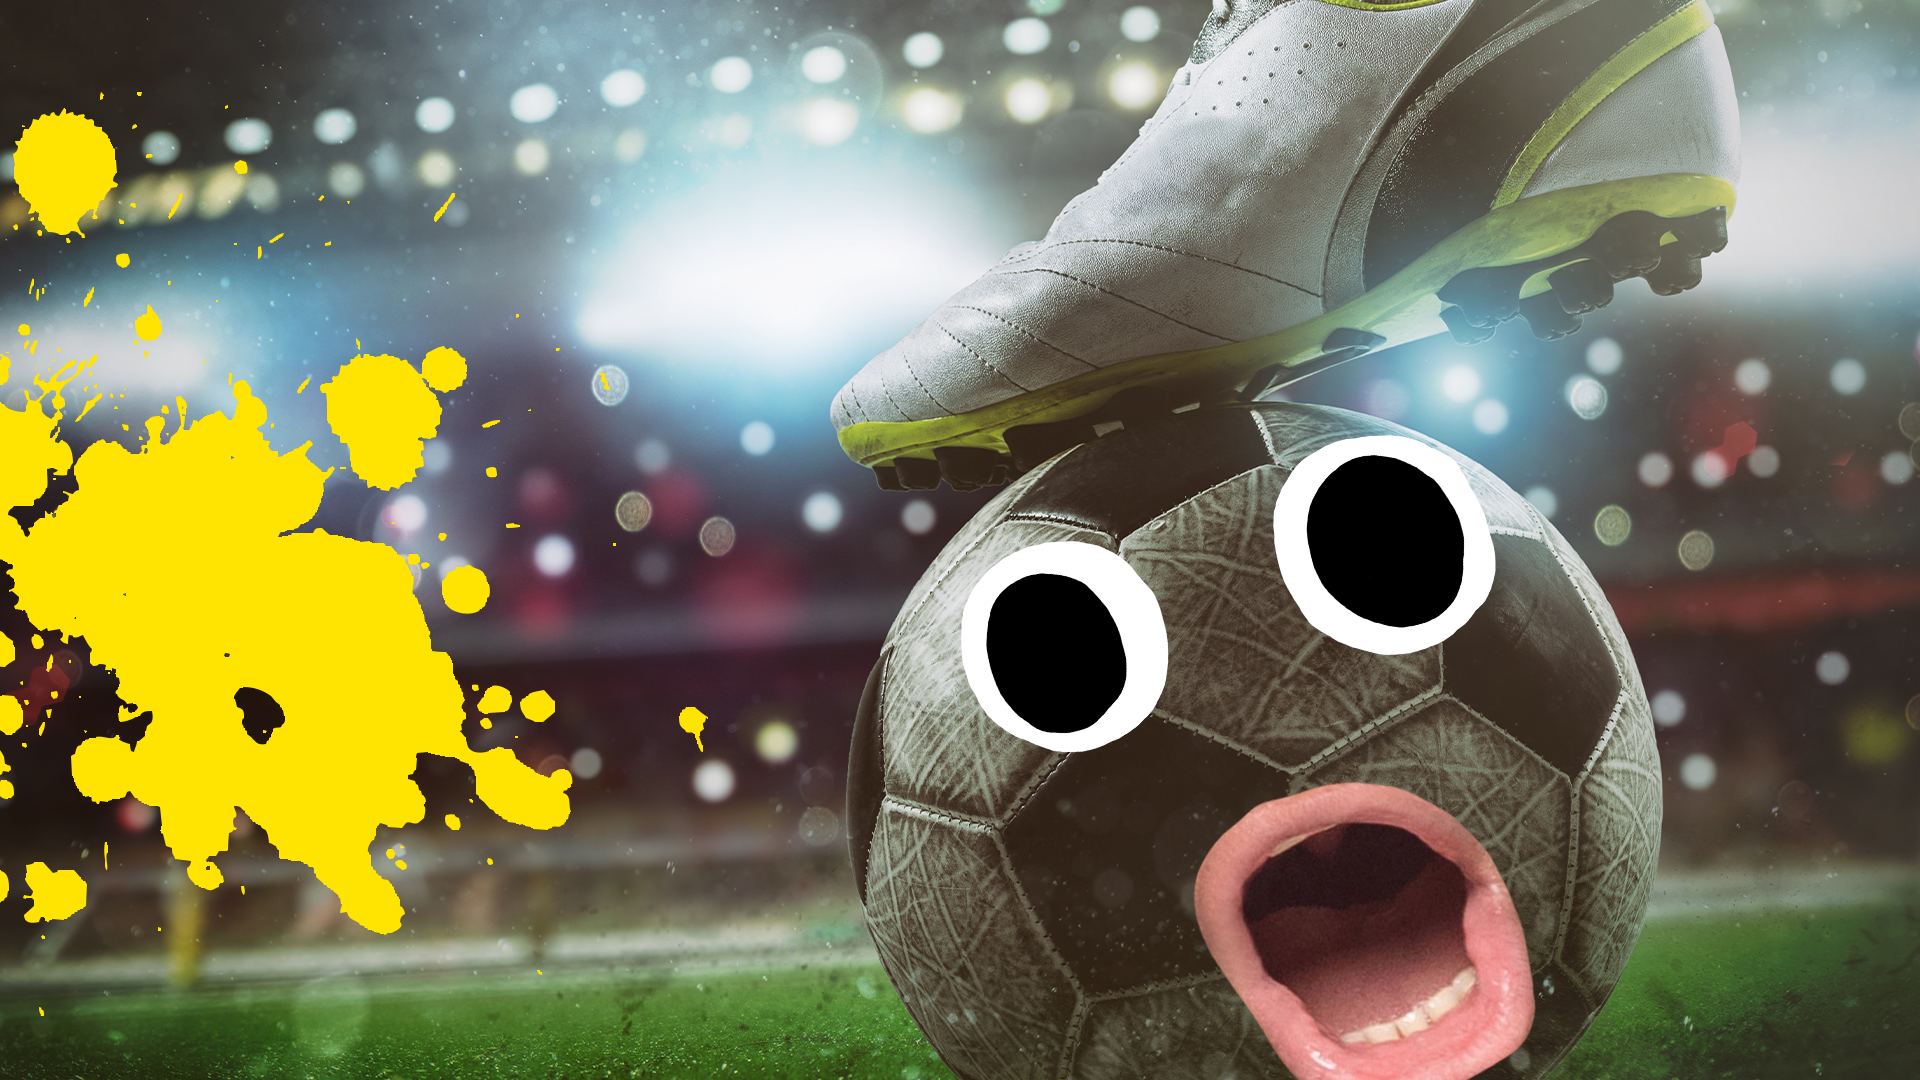 Football boot on football with derpy face in stadium with yellow splat